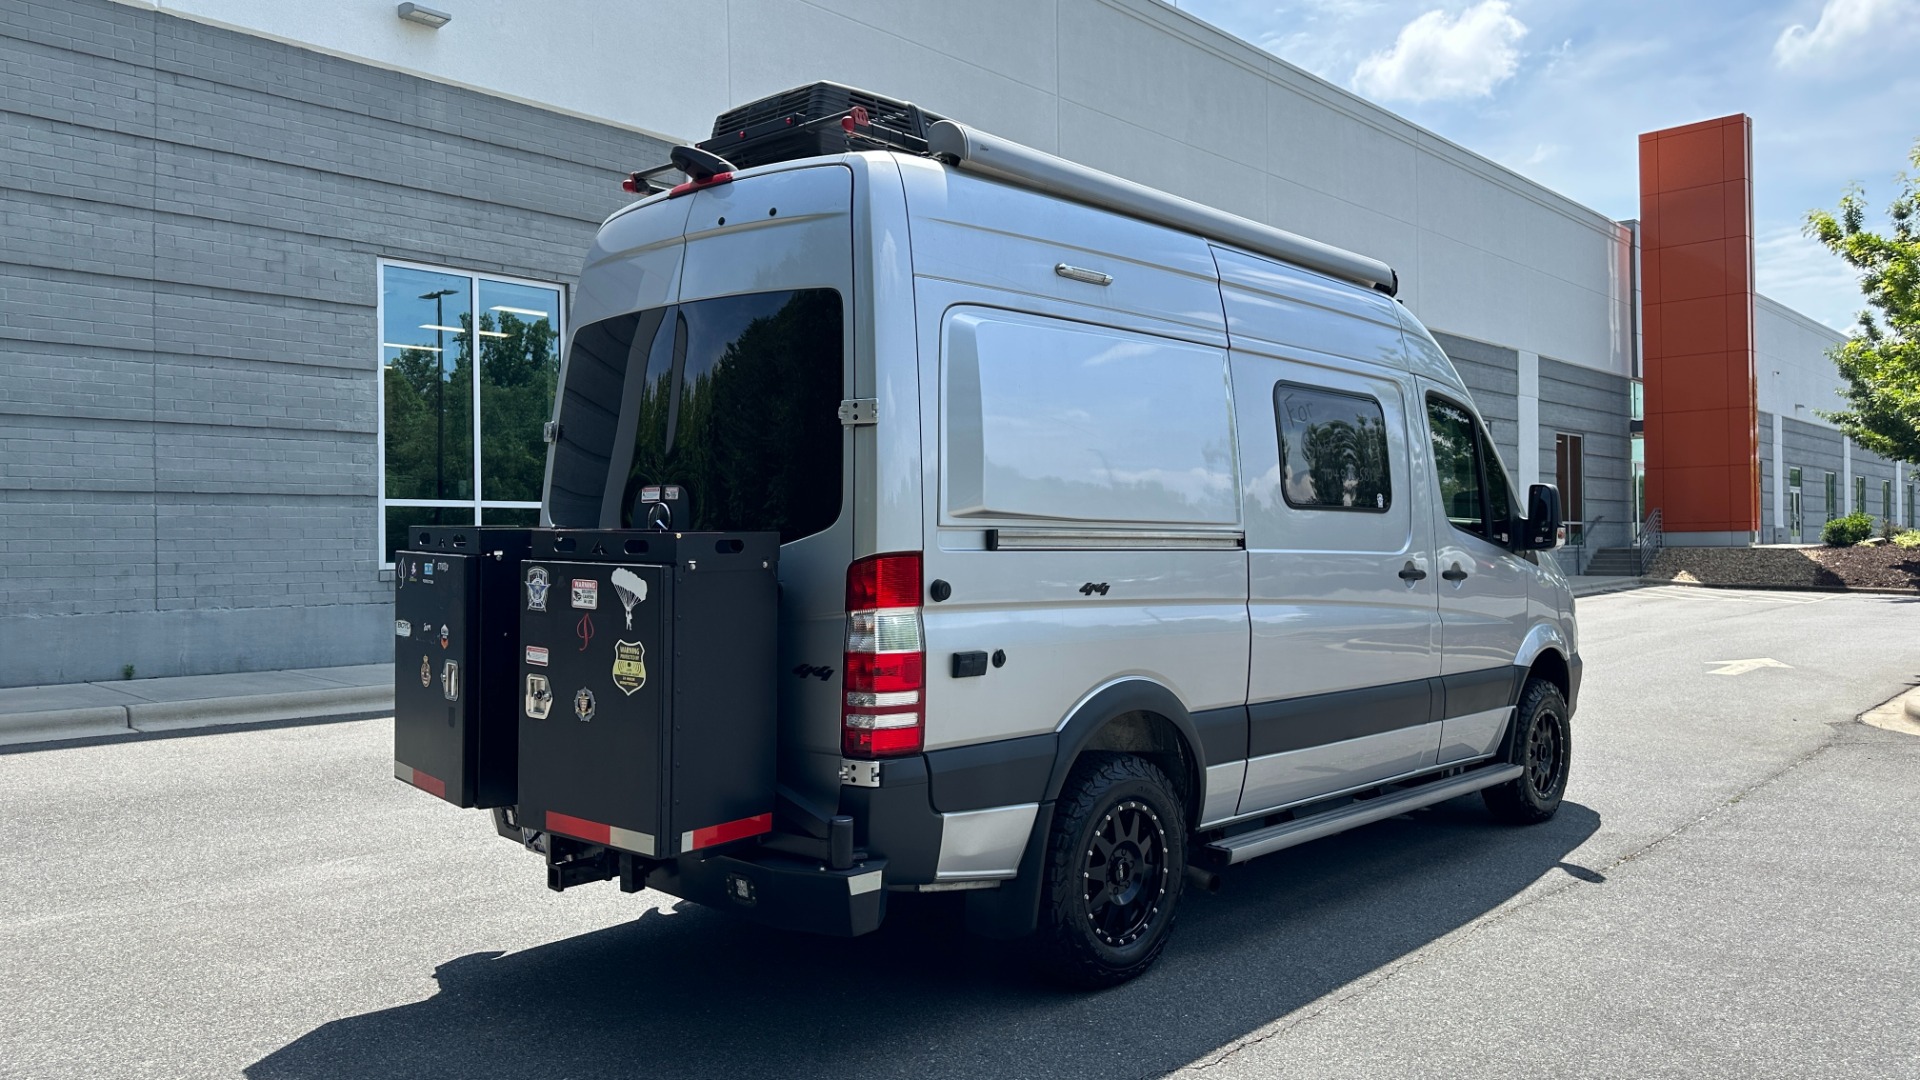 Used 2018 Mercedes-Benz Sprinter Winnebego OVERLANDER / CONVERSION SPRINTER / 4X4 / KITCHEN / BATHROOM / AIR / AWNING for sale $129,000 at Formula Imports in Charlotte NC 28227 3